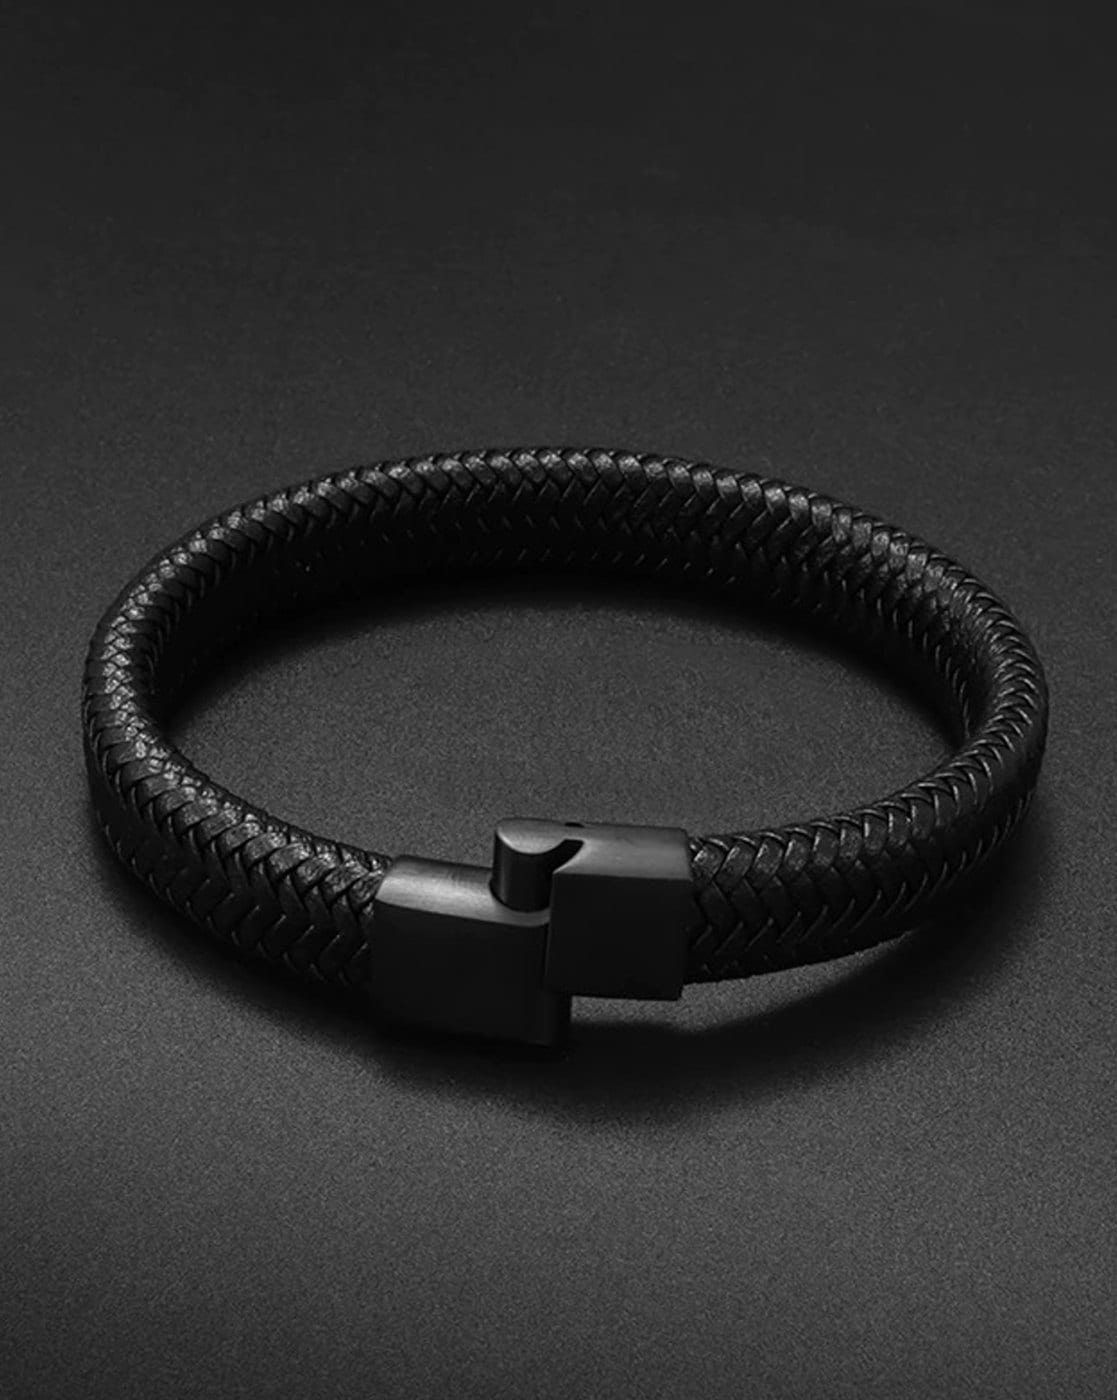 Nick Braided Leather Bracelet with Stainless Steel Clasp – Lizzy James